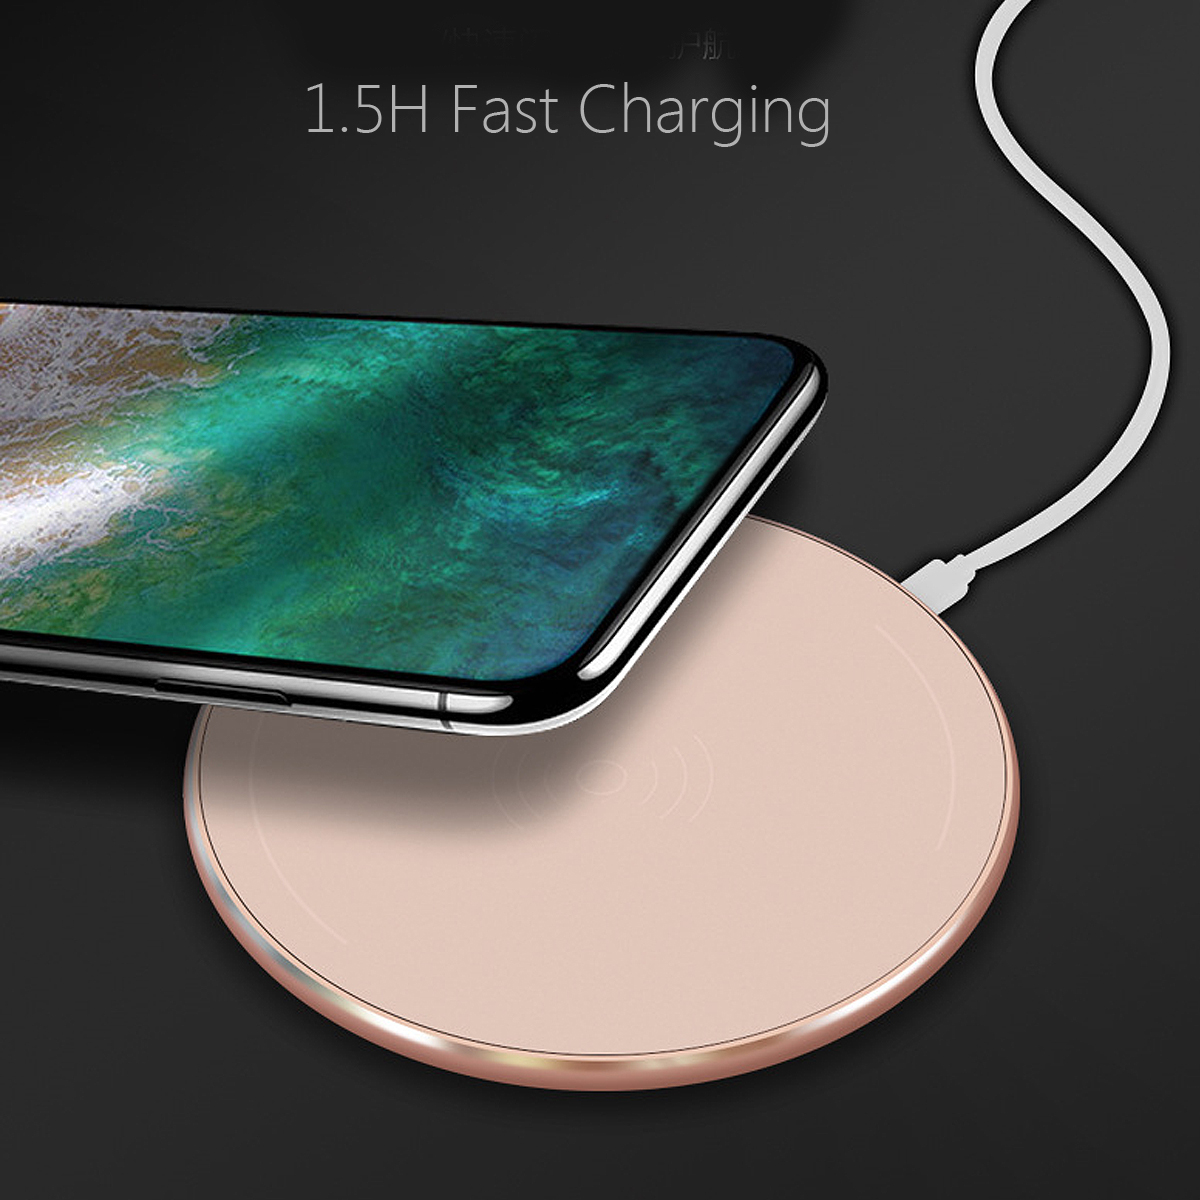 Bakeey 10W Metal Scrub QI wireless Fast Charging Charger Pad For iPhoneX 8/8Plus Samsung S8 iwatch 3